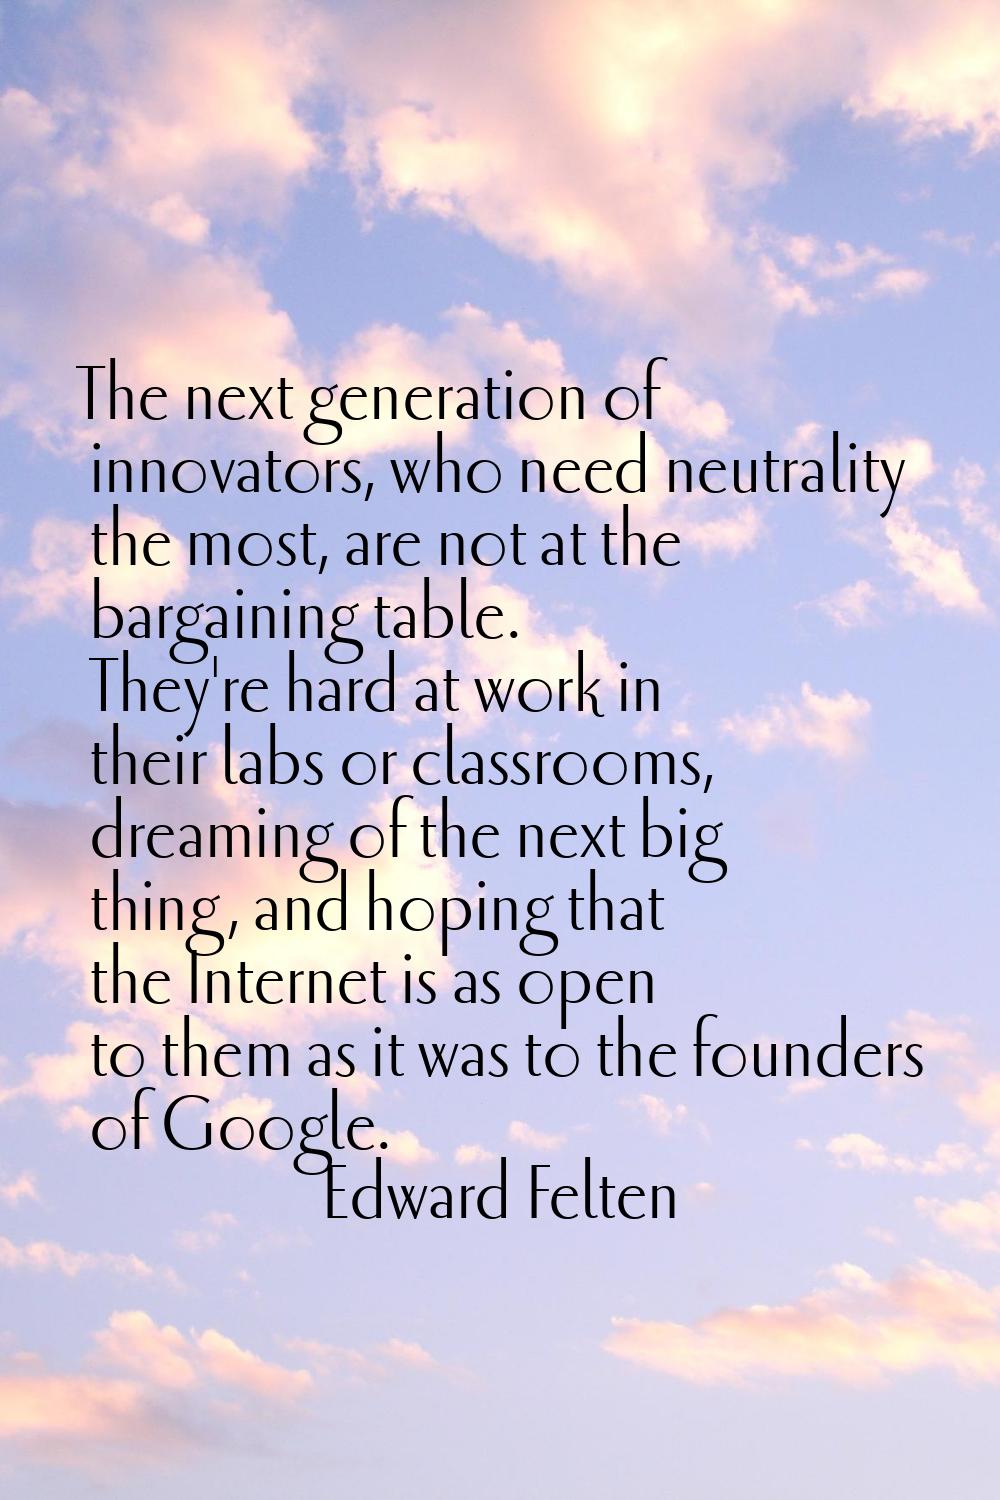 The next generation of innovators, who need neutrality the most, are not at the bargaining table. T